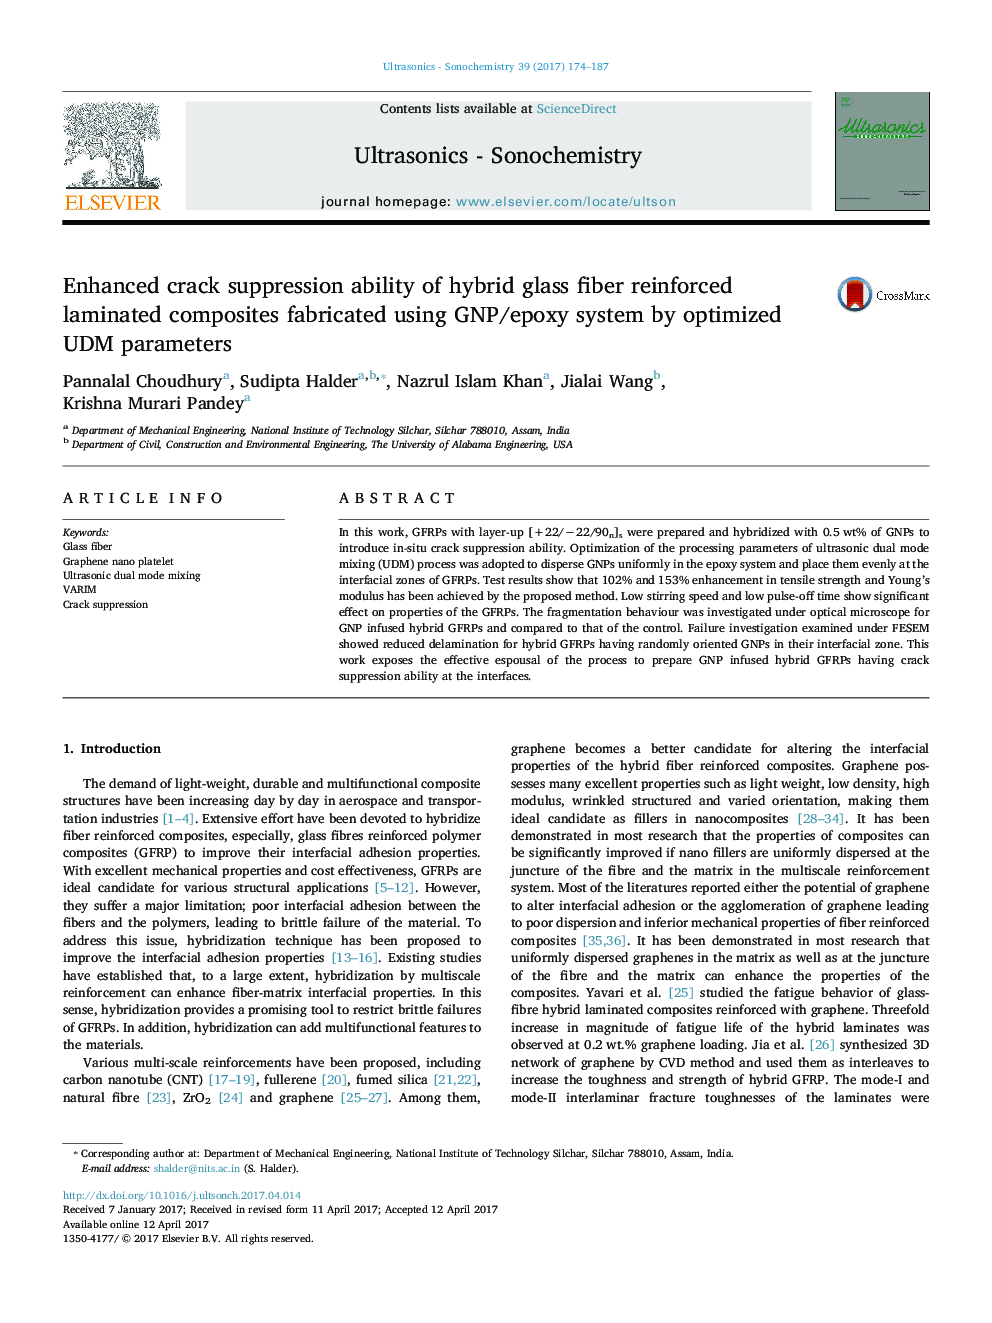 Enhanced crack suppression ability of hybrid glass fiber reinforced laminated composites fabricated using GNP/epoxy system by optimized UDM parameters